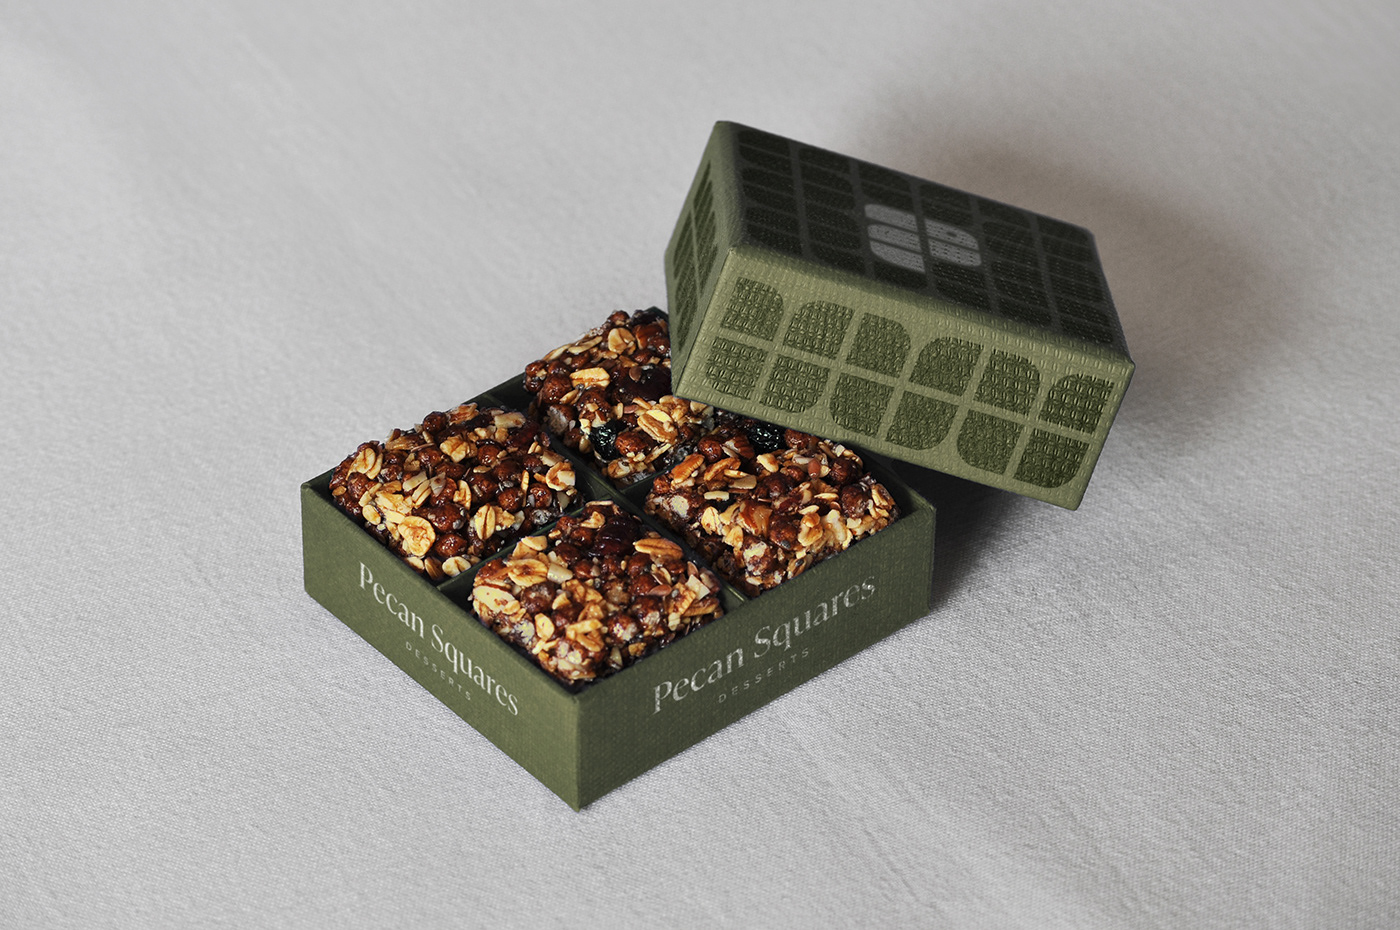 An open Pecan Square package with pecan desserts inside